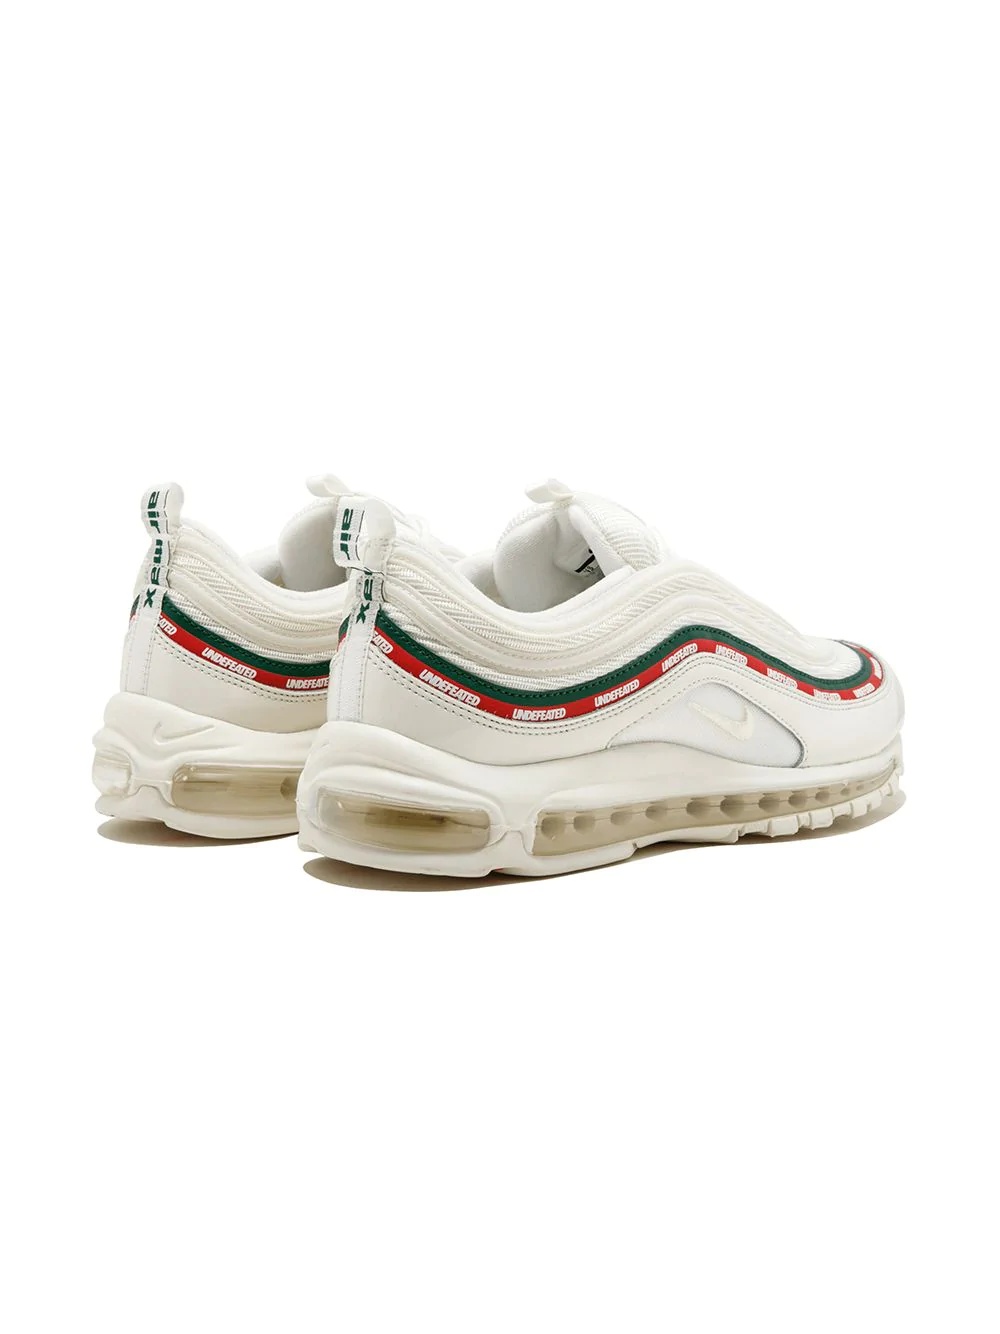 x Undefeated Air Max 97 OG "White" sneakers - 3